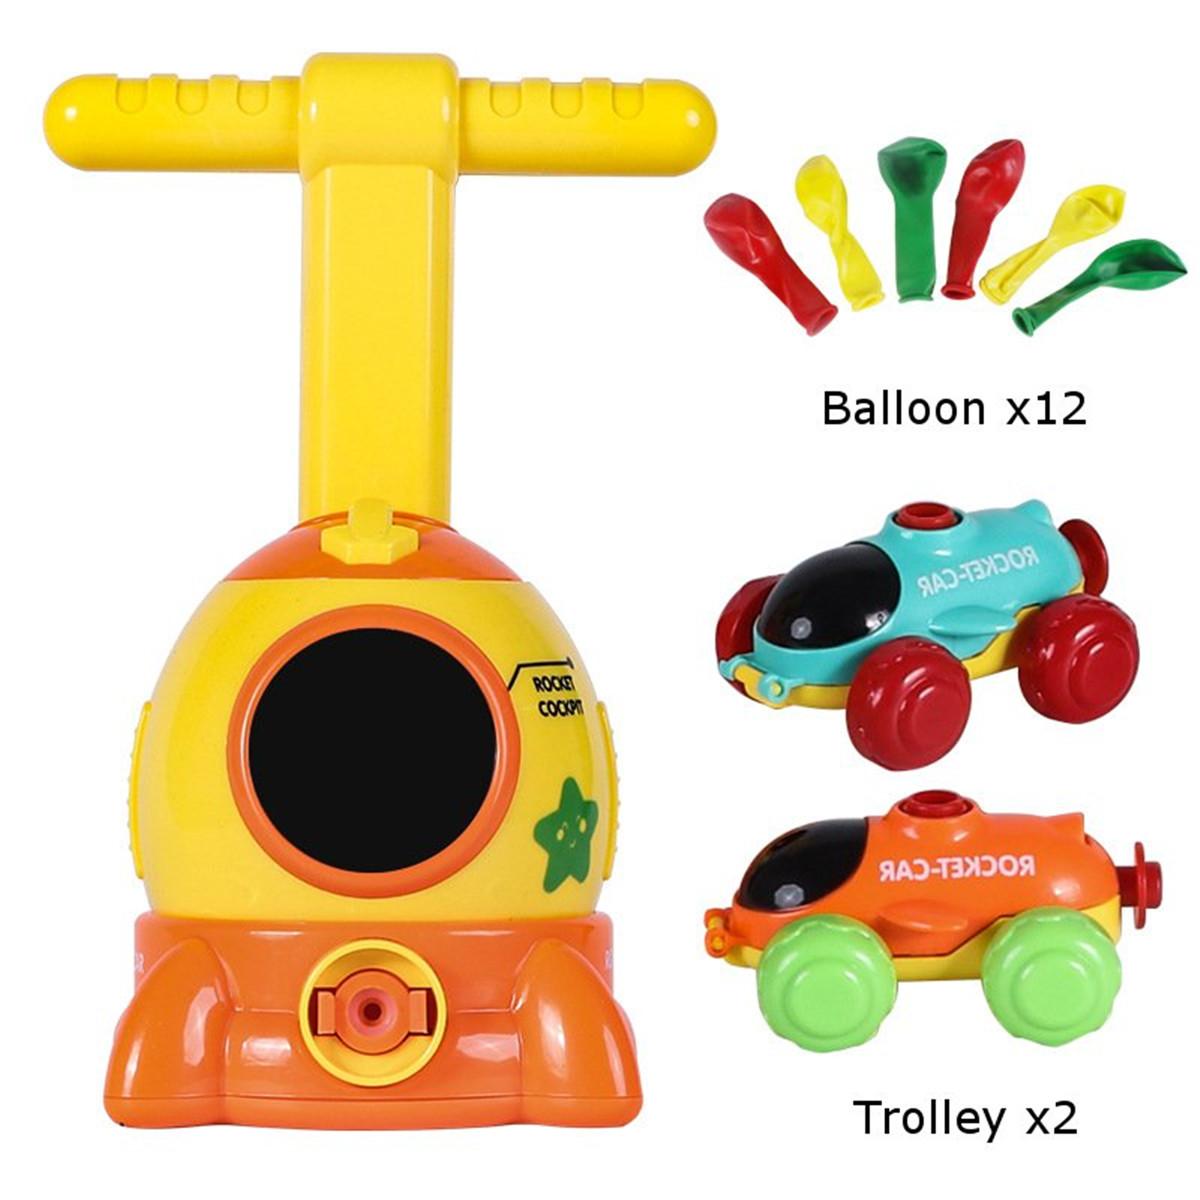 Inertial-Power-Balloon-Car-Intellectual-Development-Learning-Education-Science-Experiment-Toy-for-Ki-1698287-8